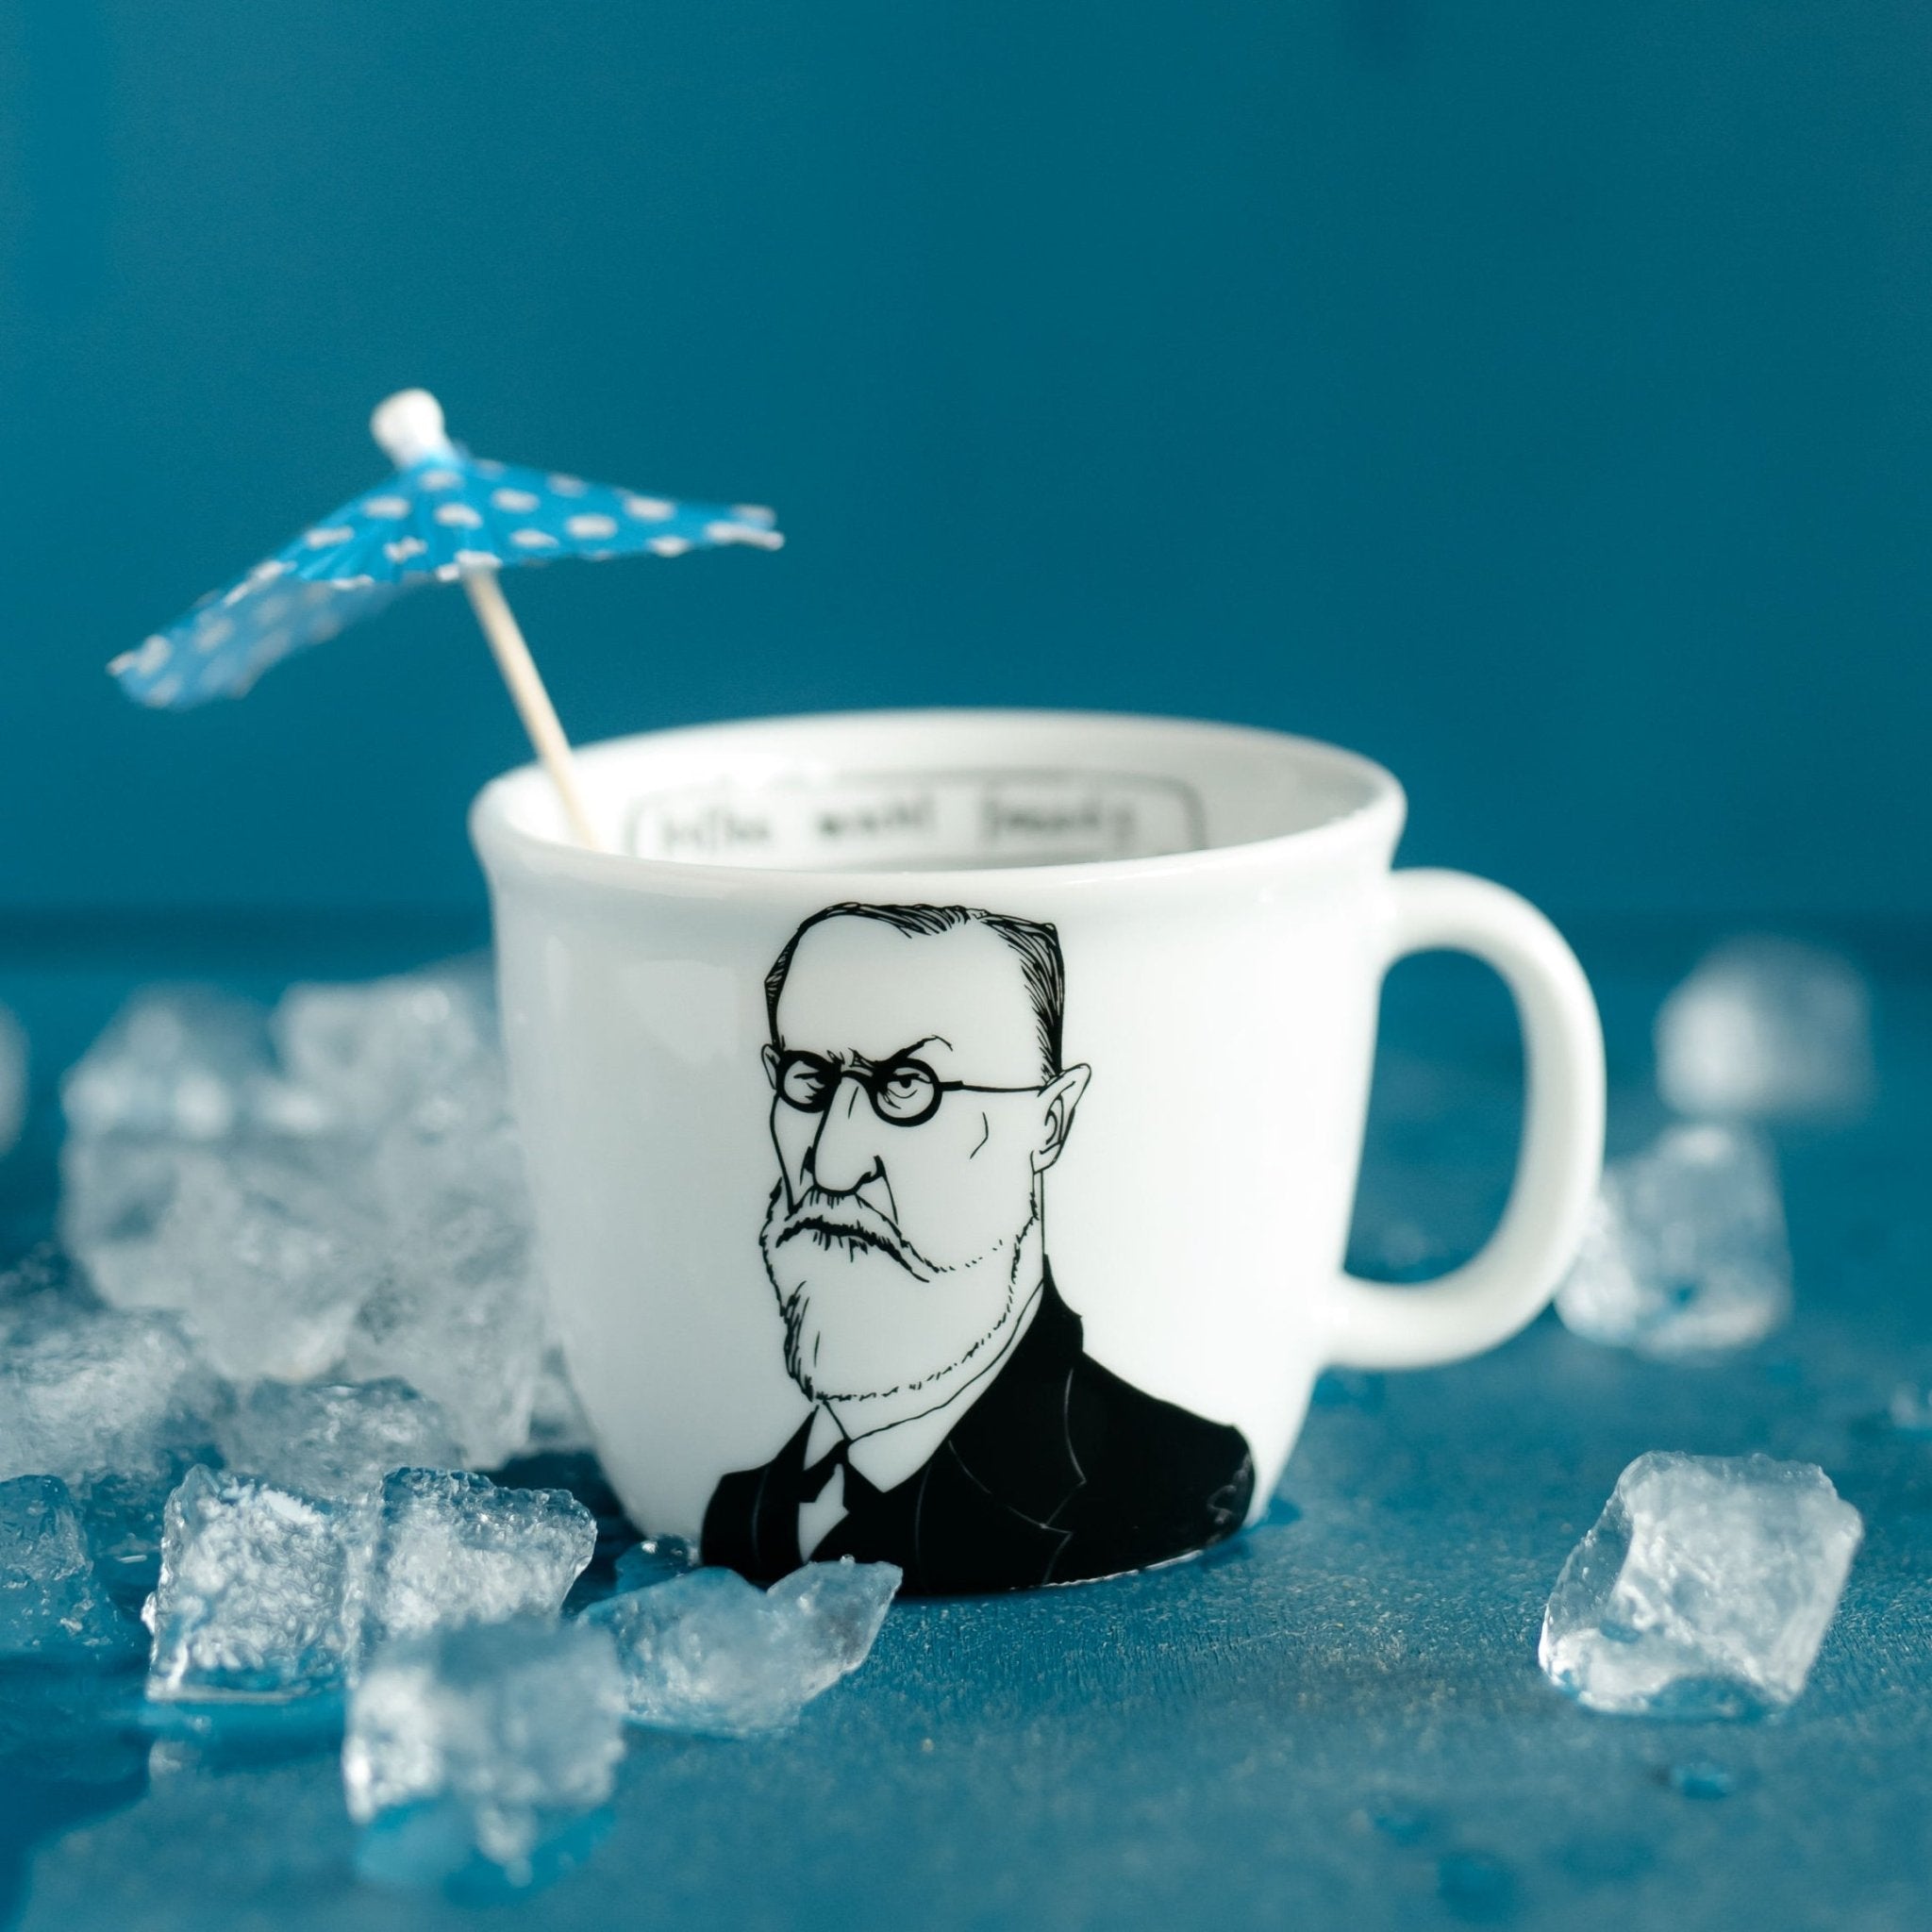 Porcelain cup inspired by Sigmund Freud with ice and umbrella